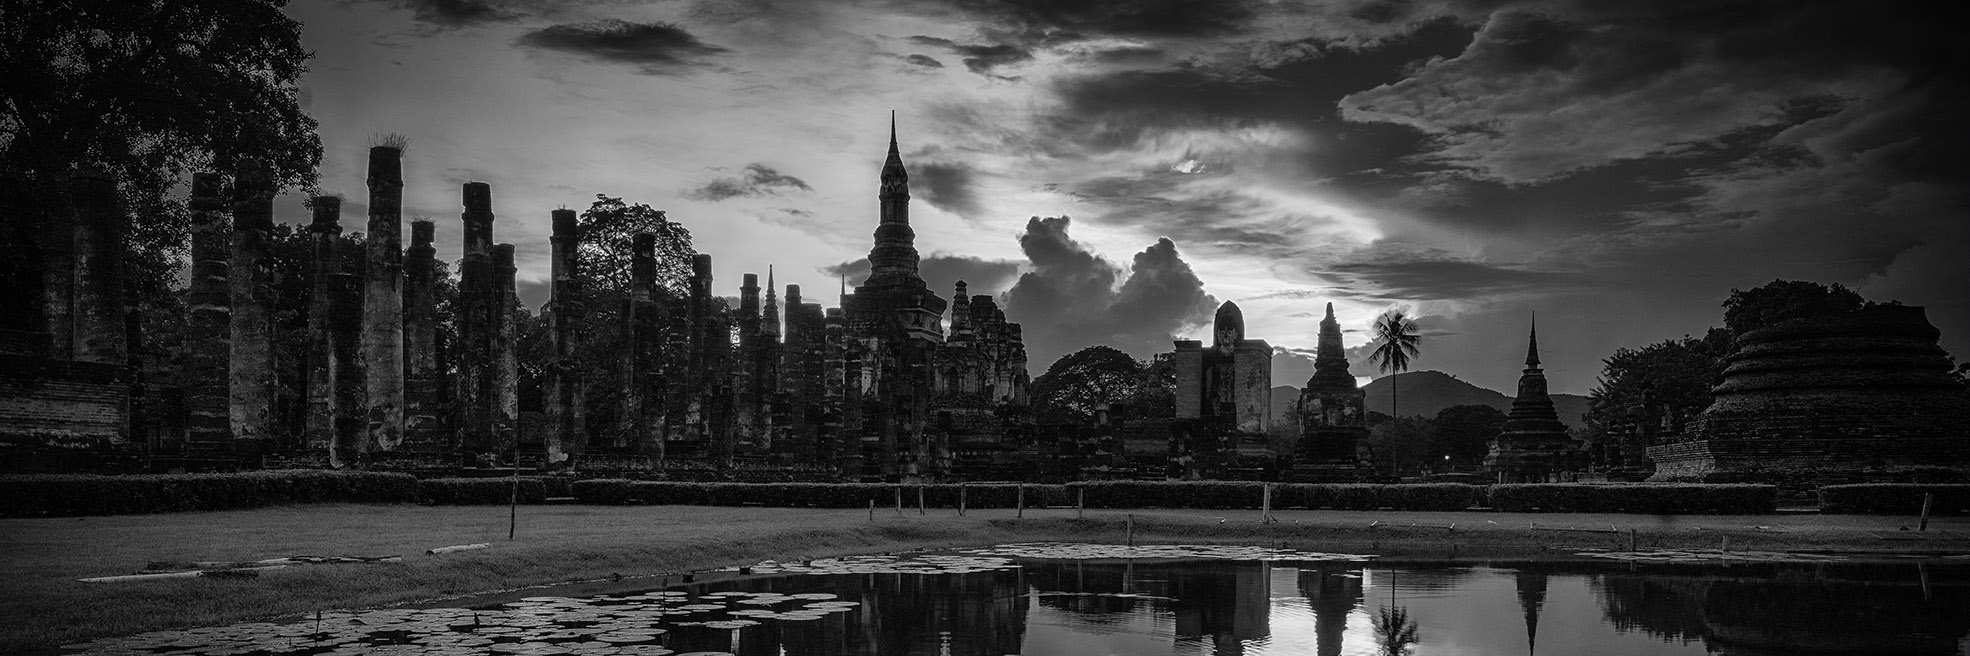 Panoramic image of Sukothai in Thailand in Black and White